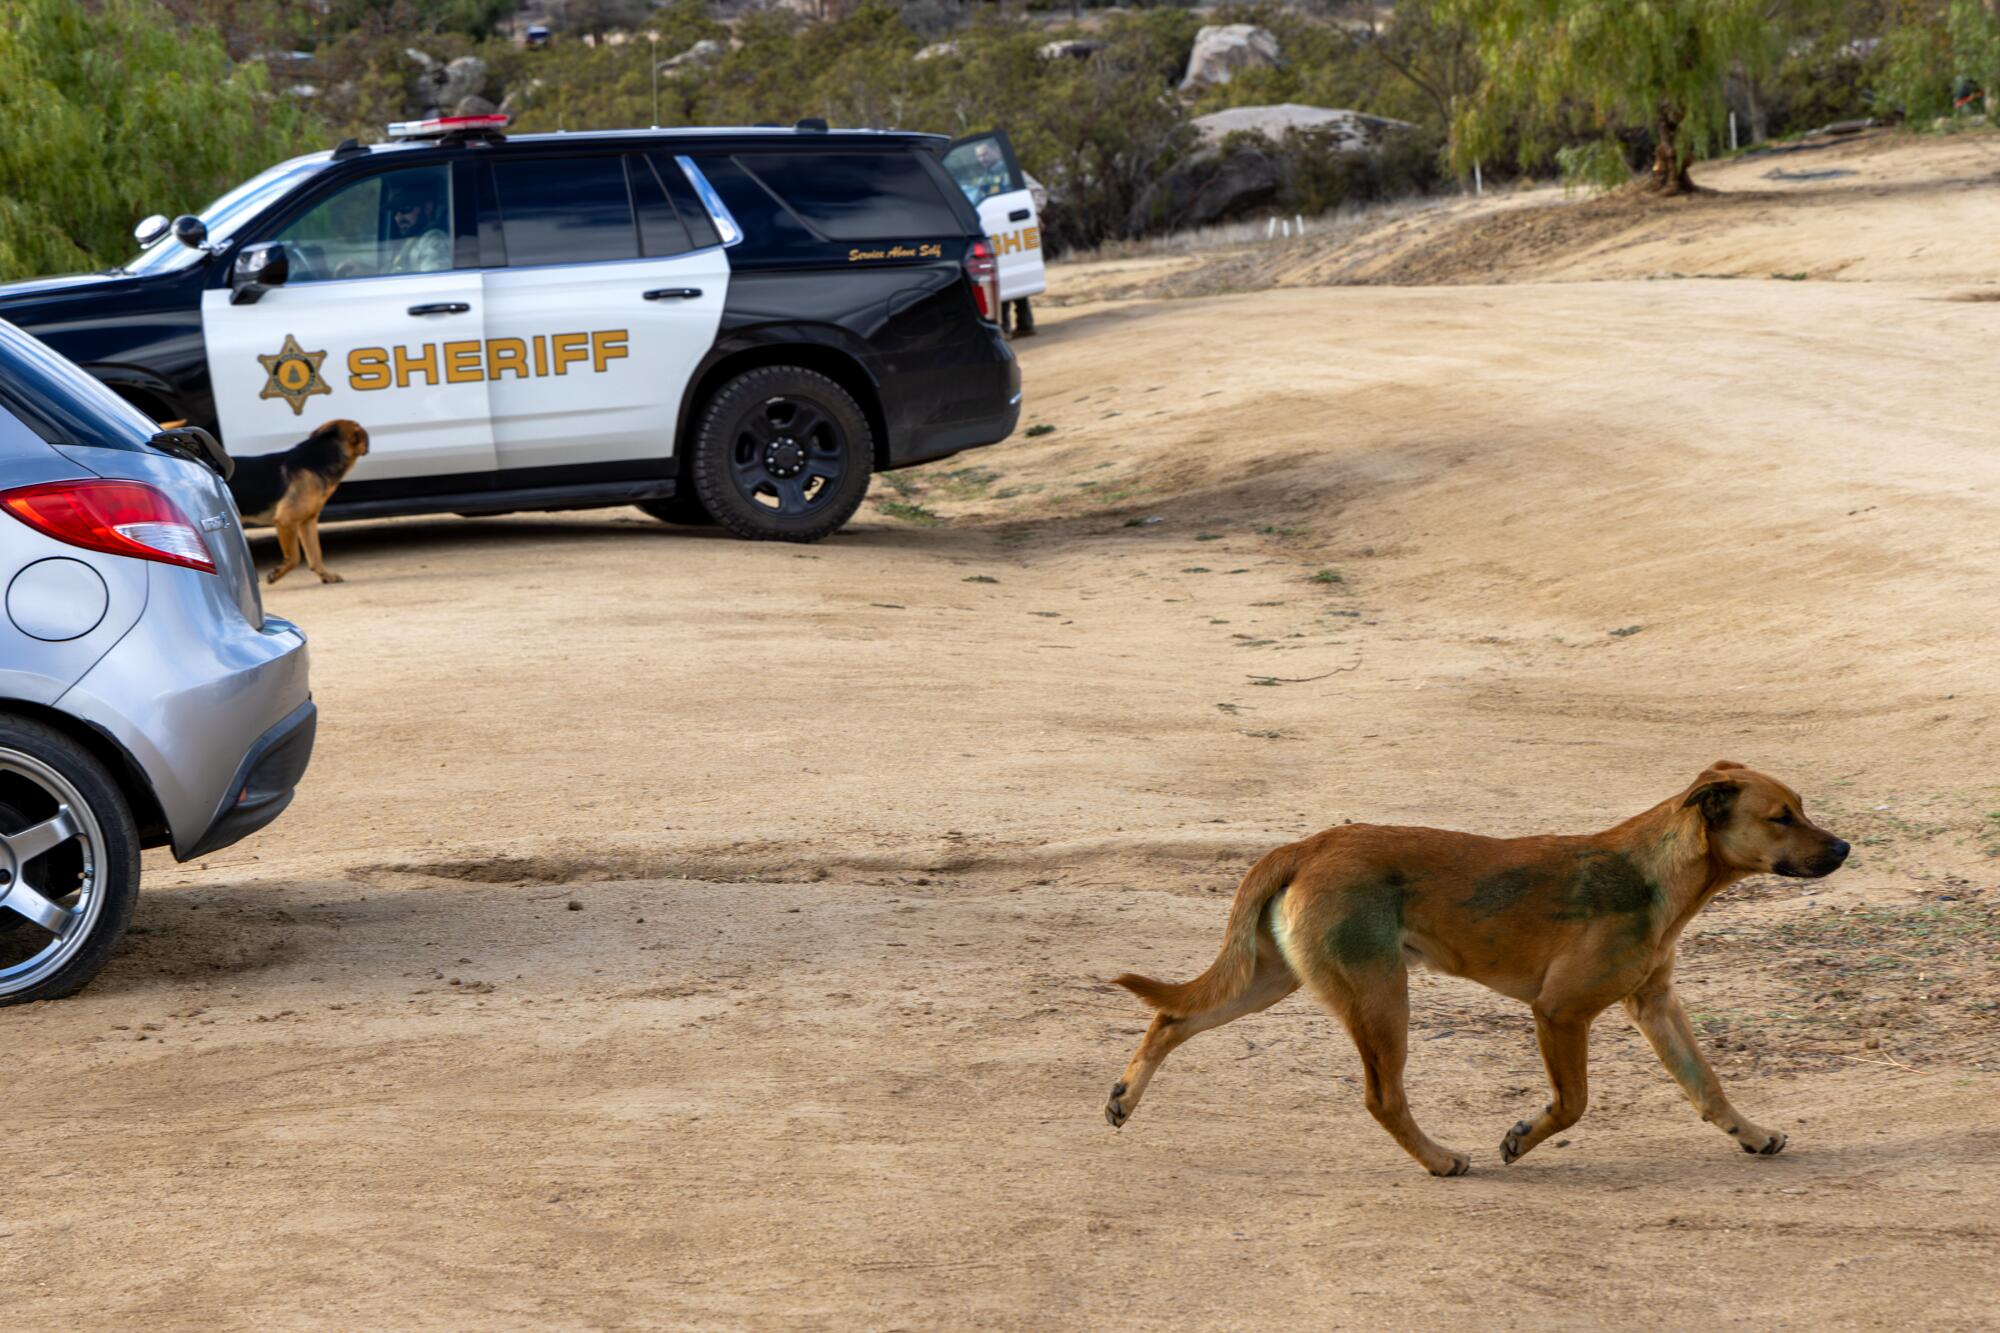 An unleashed dog trots past a sheriff's cruiser.